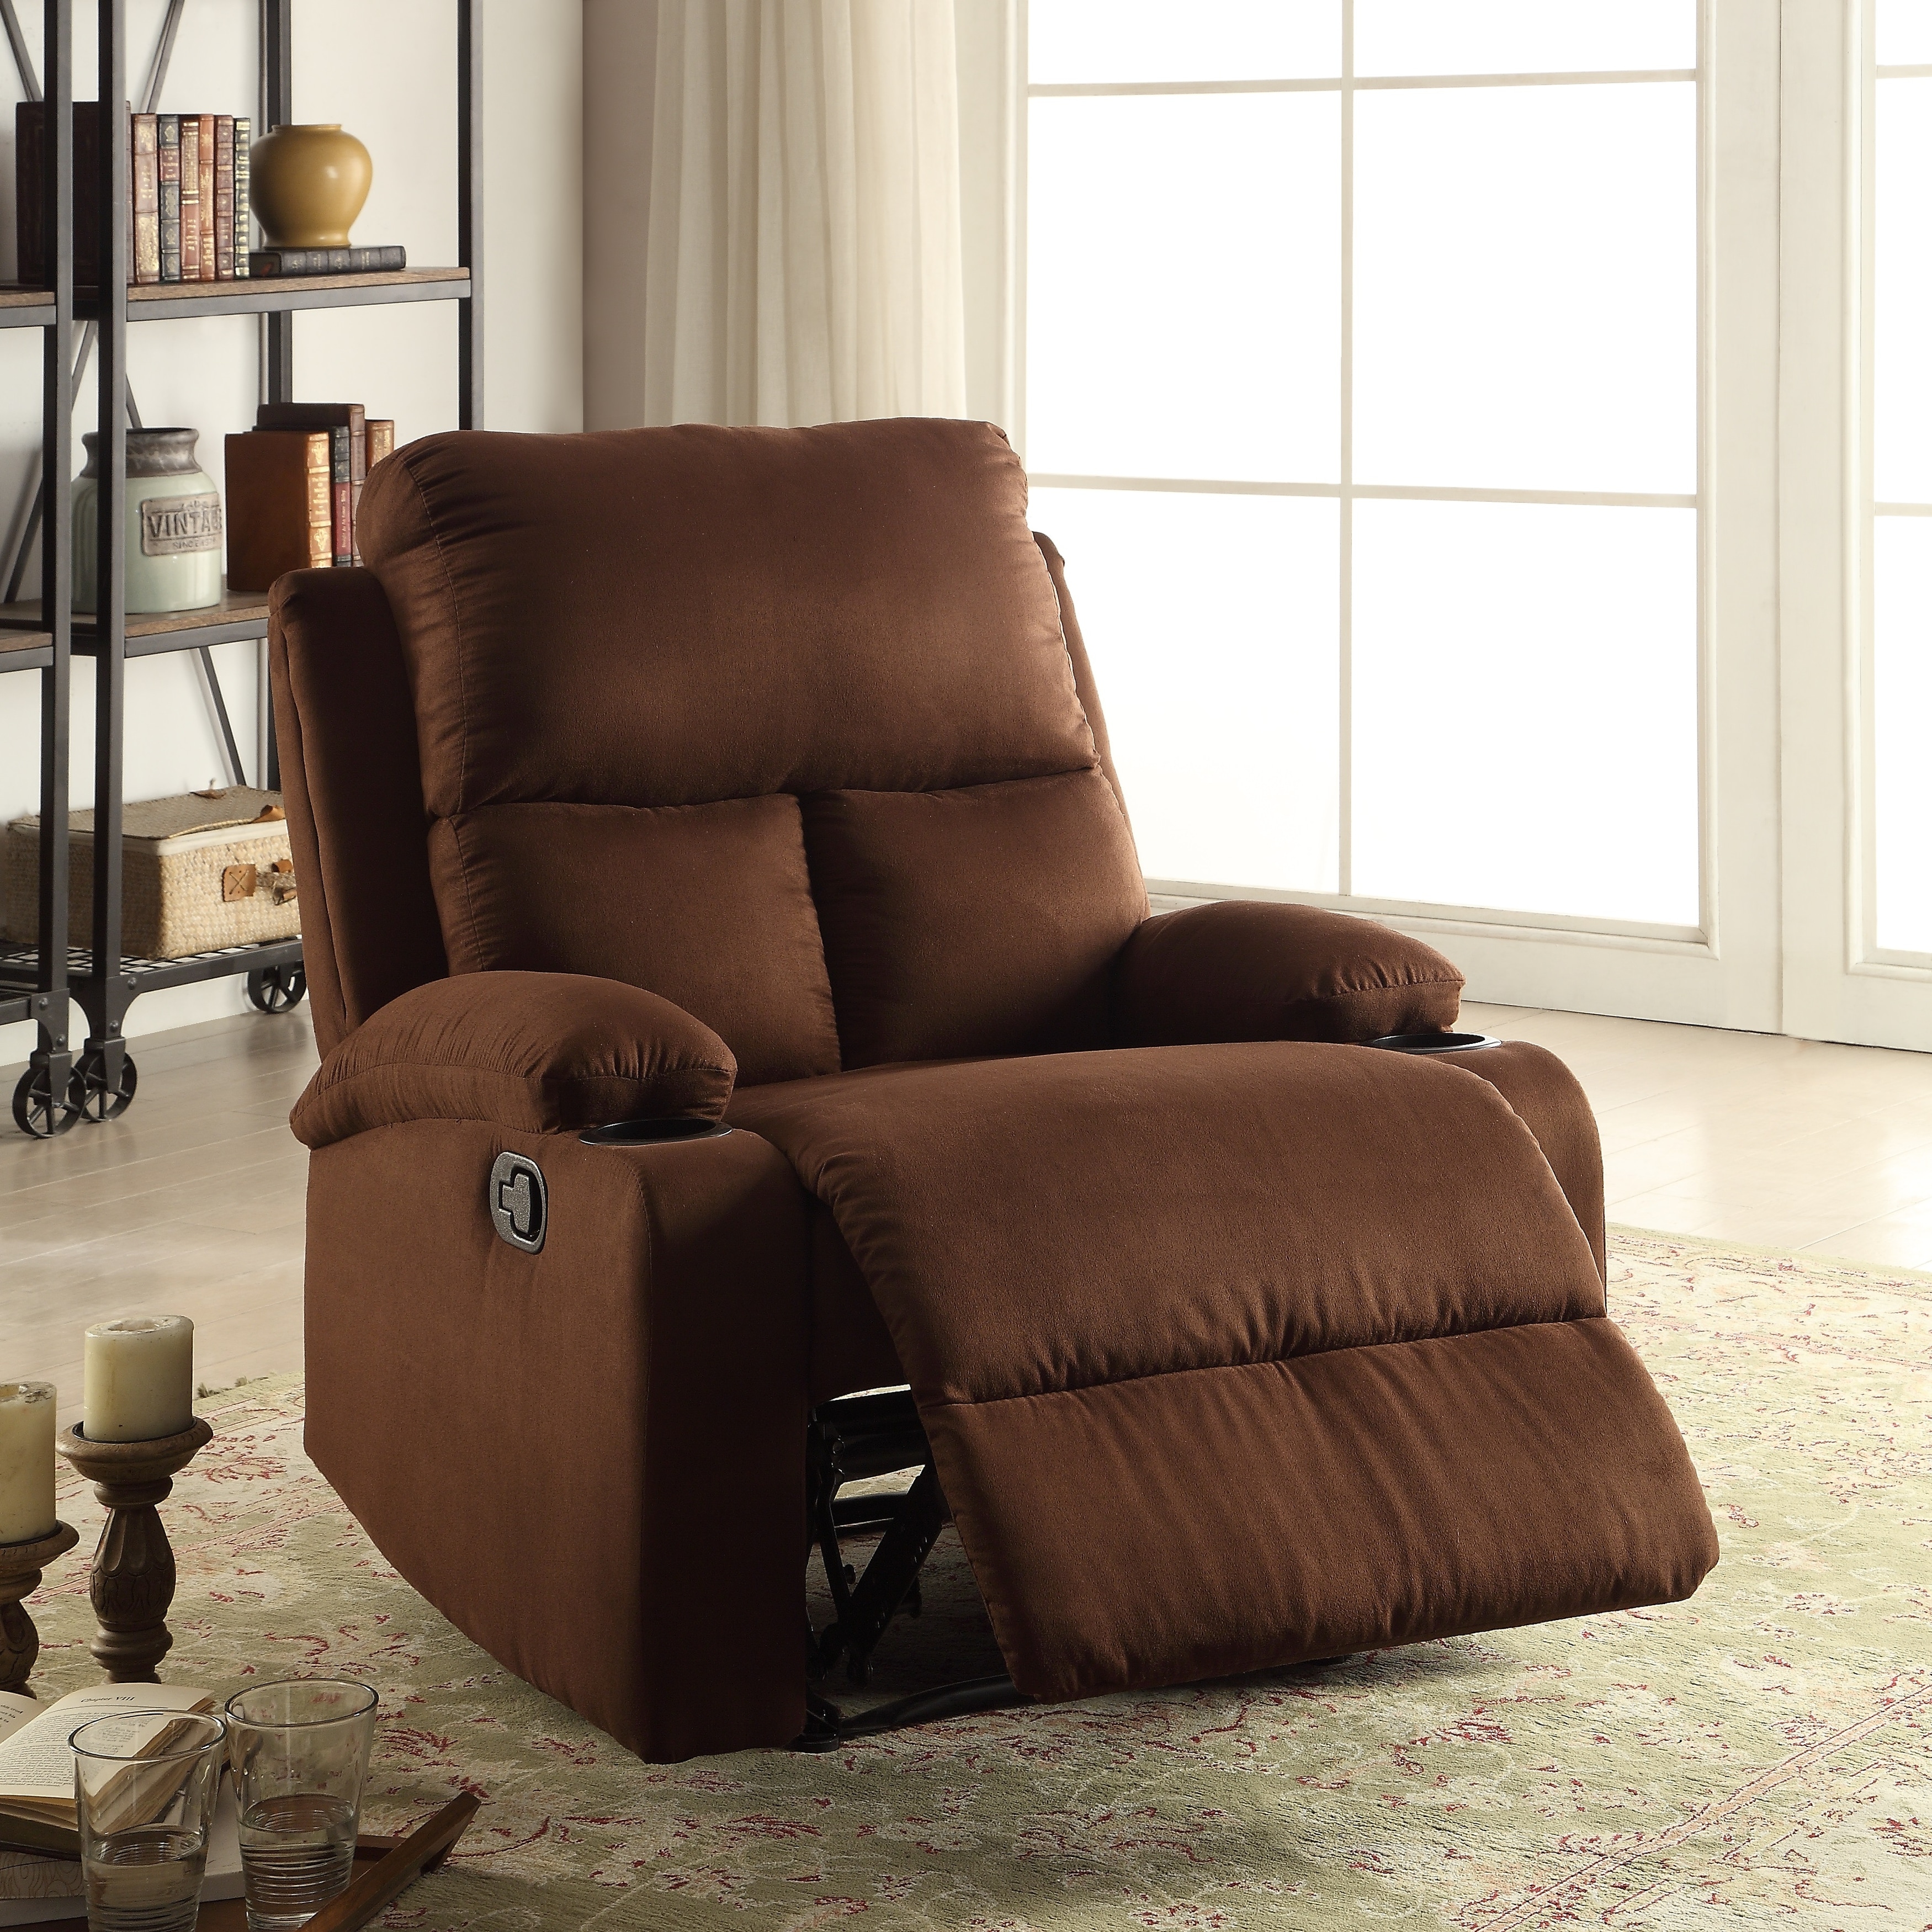 https://ak1.ostkcdn.com/images/products/is/images/direct/3a865e9244a860efa66de168c06c045fcf263ba1/Chocolate-Microfiber-Vintage-Motion-Recliner-with-Tight-Back-%26-Seat-Cushions-and-Pillow-Top-Arm-%26-Cup-Holder.jpg